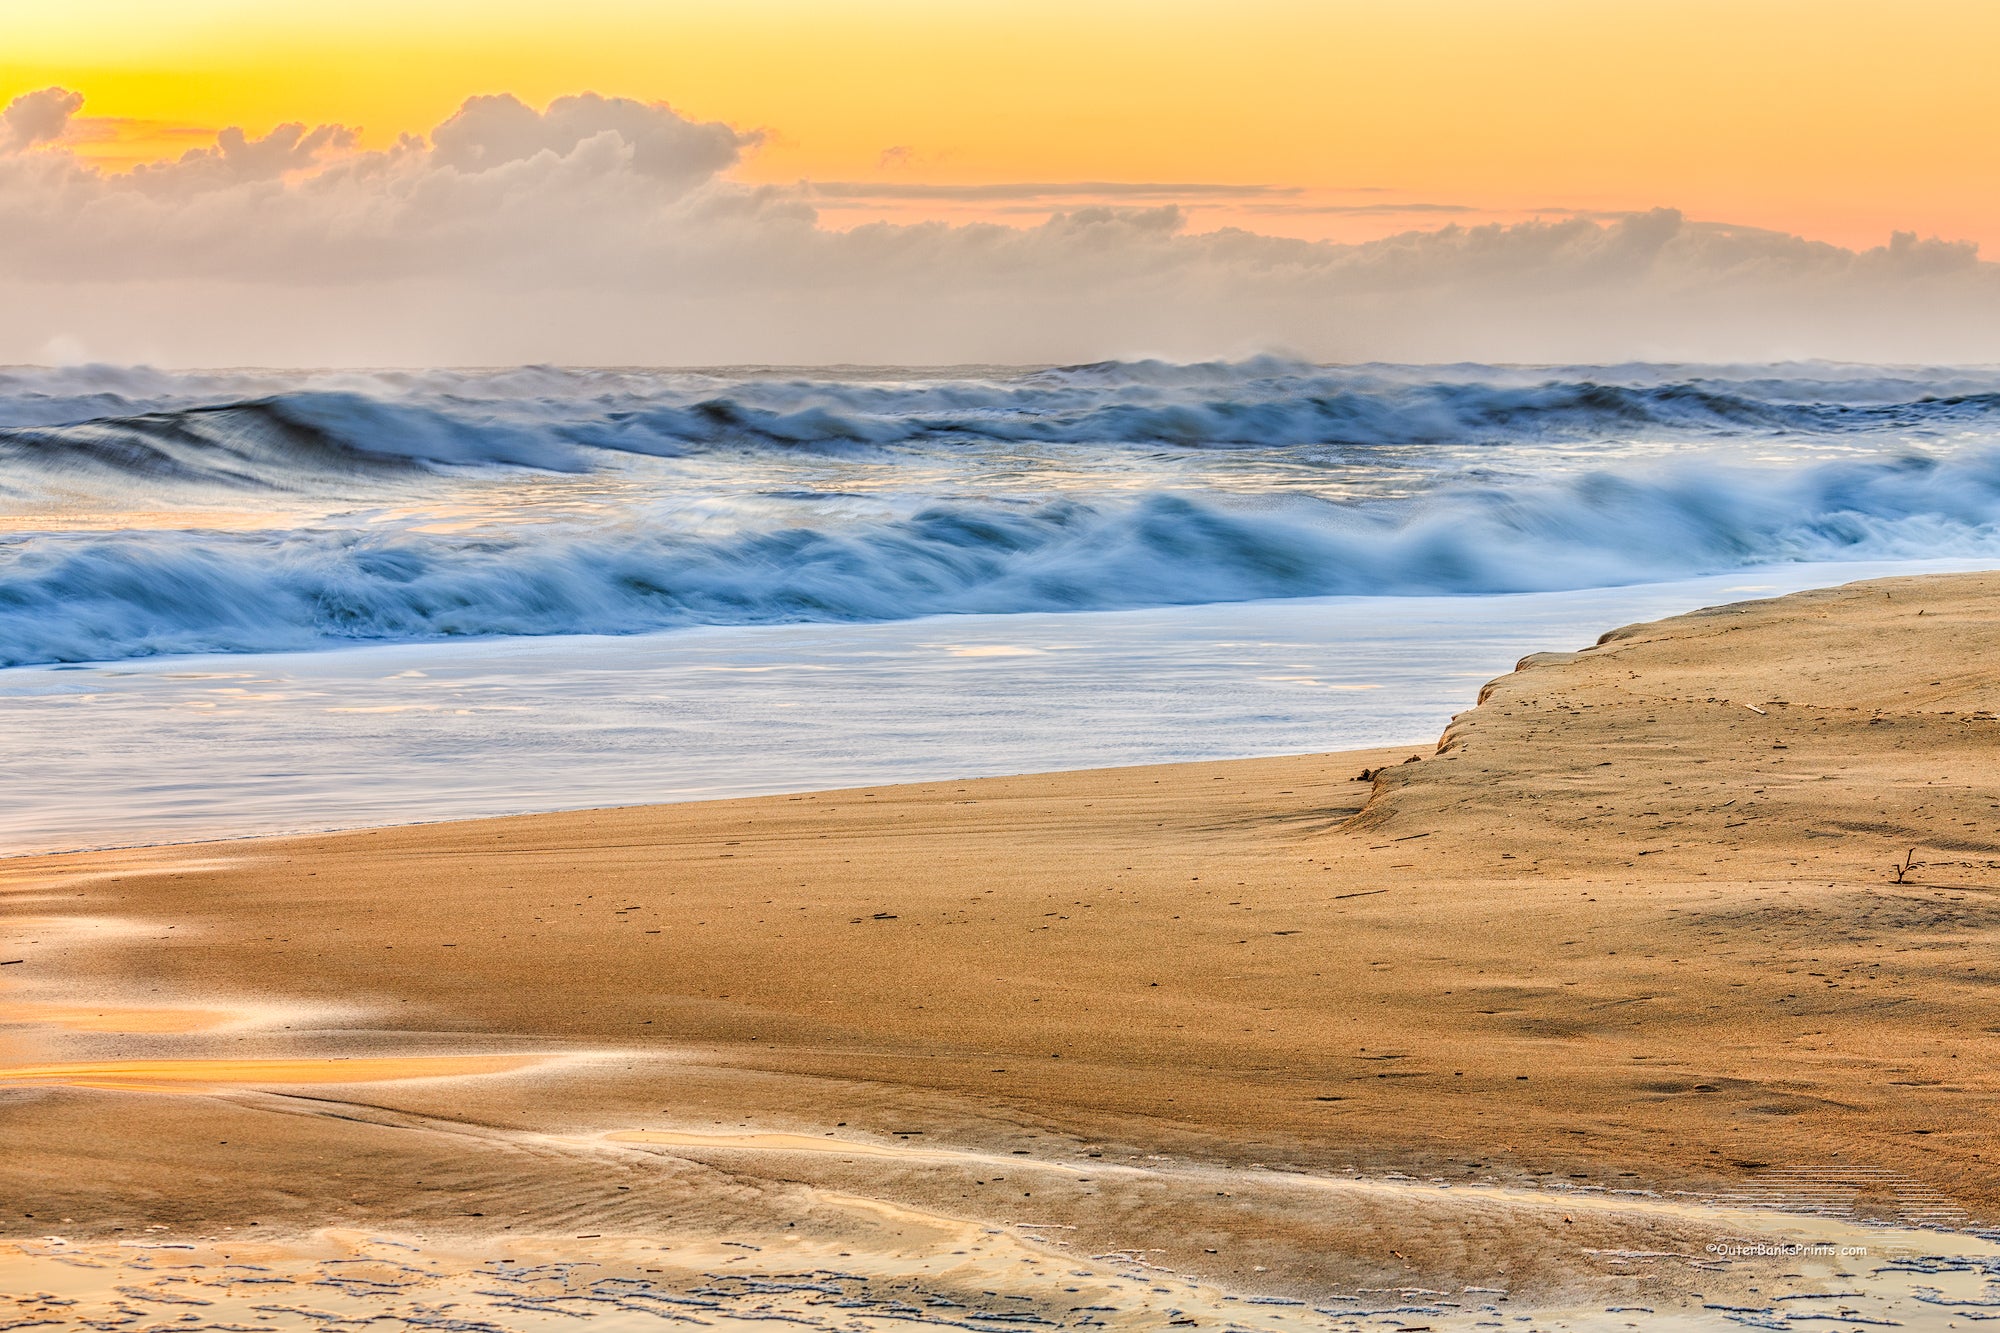 Nags Head beach captured in the  glow of early morning.